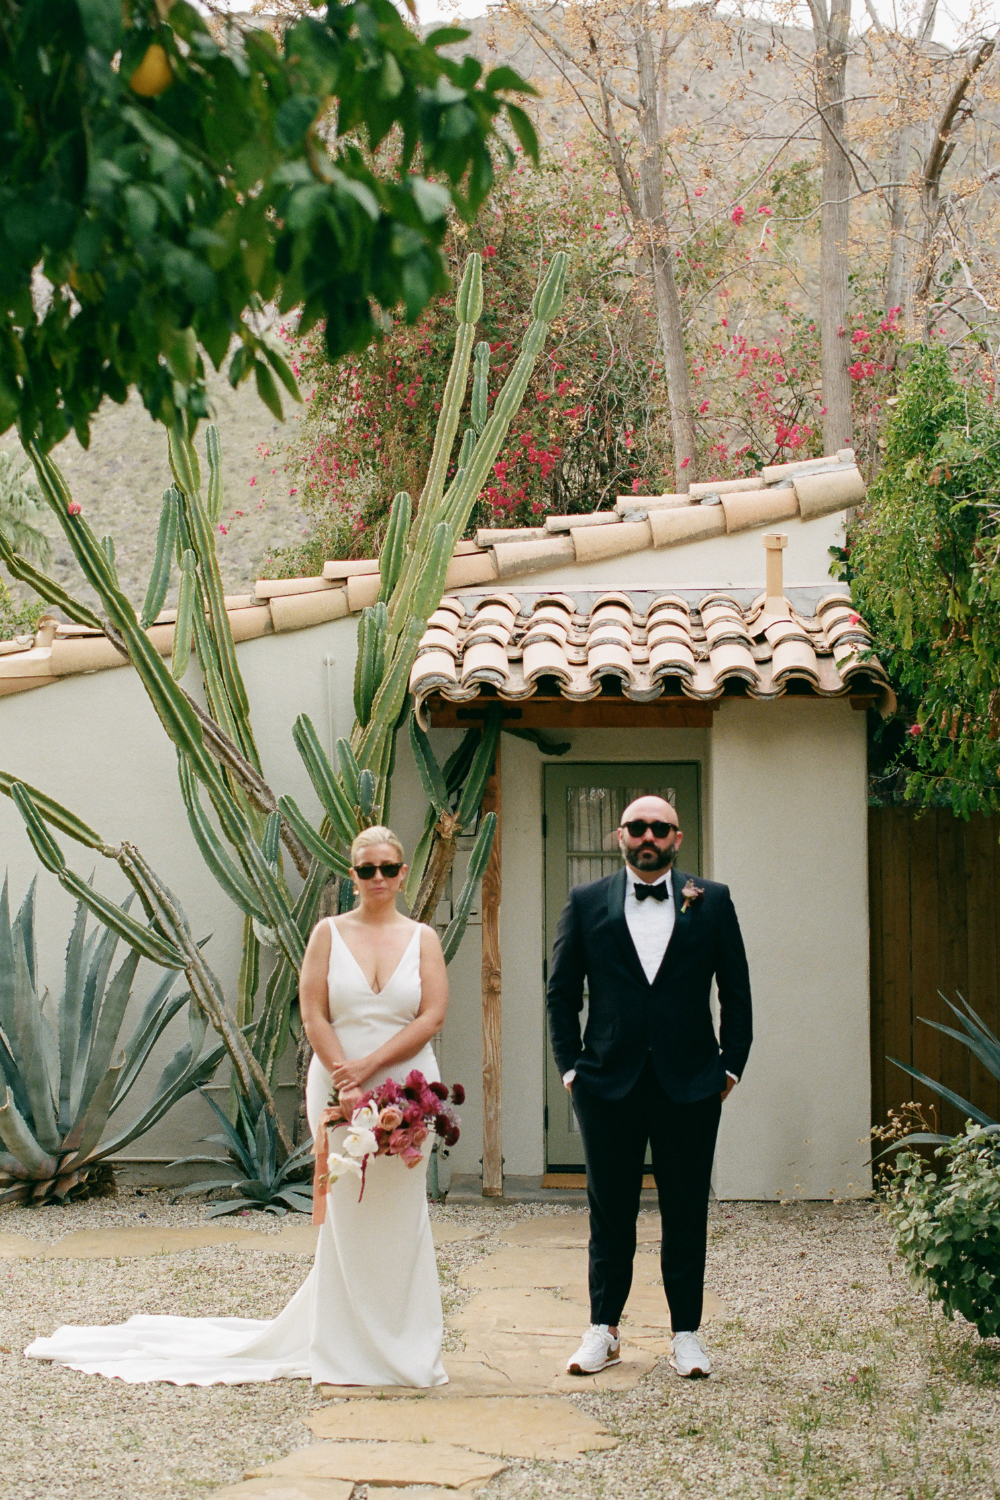 Bride and groom posing with sunglasses at Casa Cody venue for Palm Springs wedding